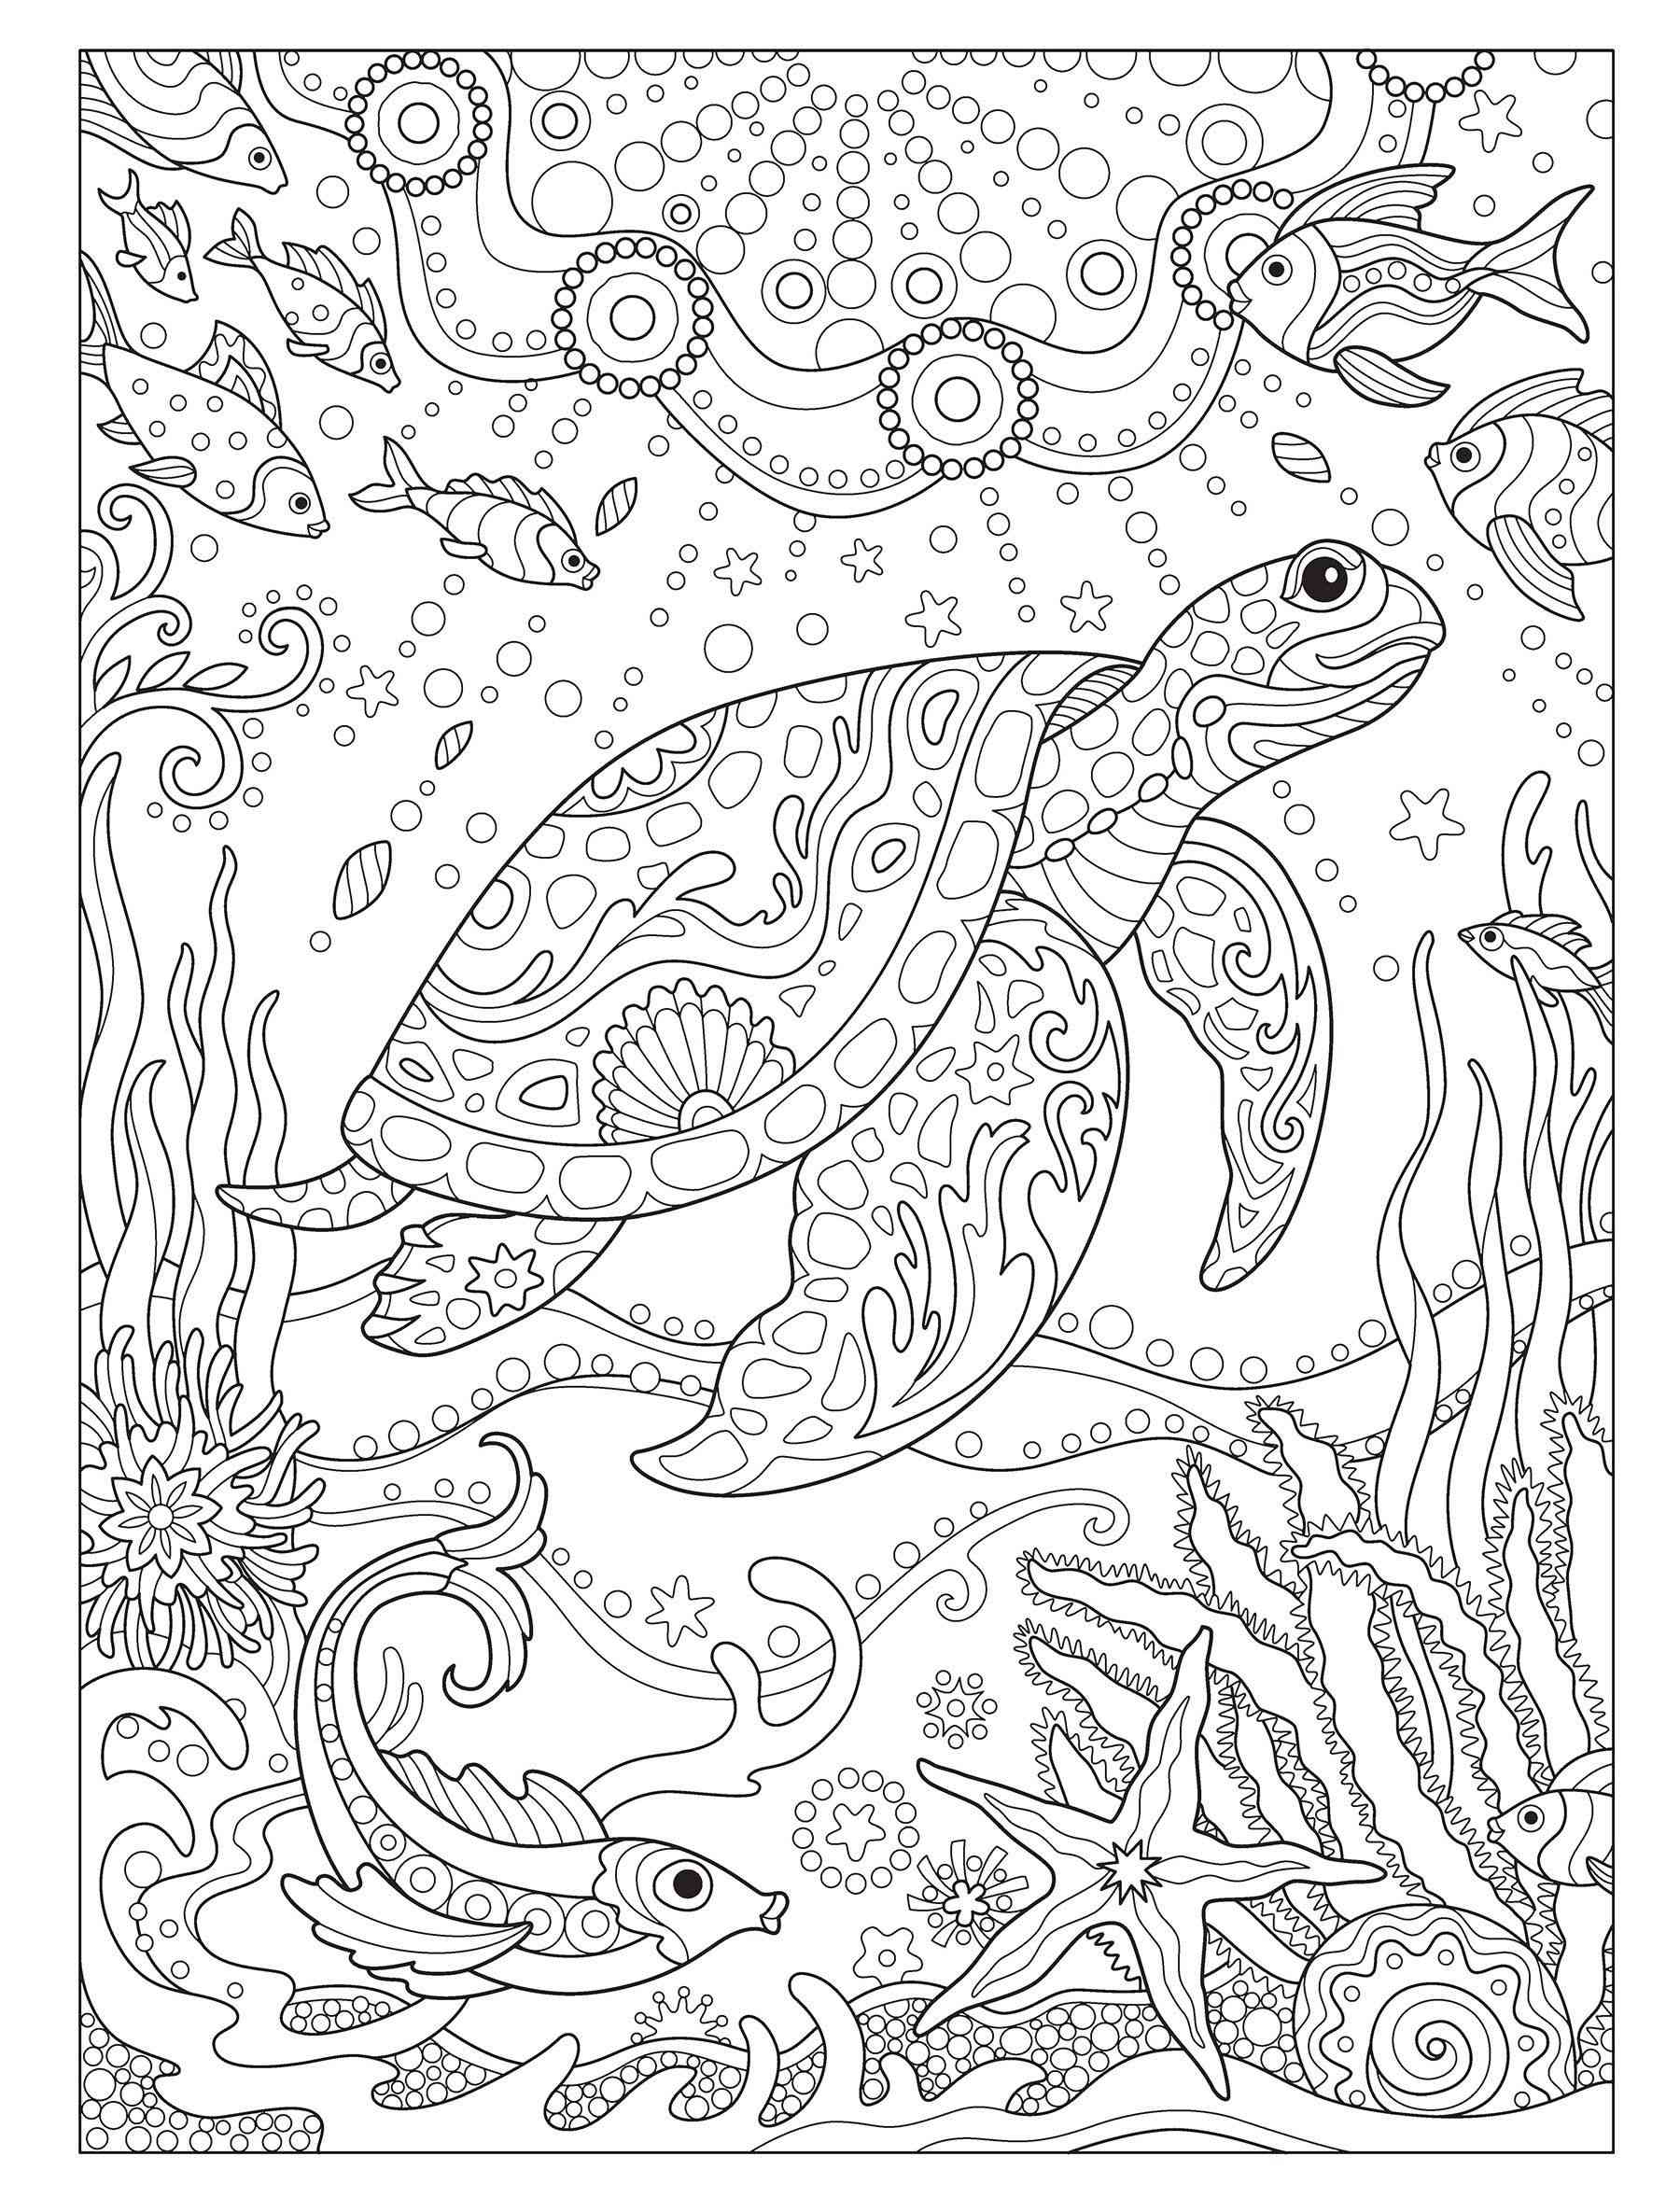 Underwater World coloring pages for Adults Free Download and Print